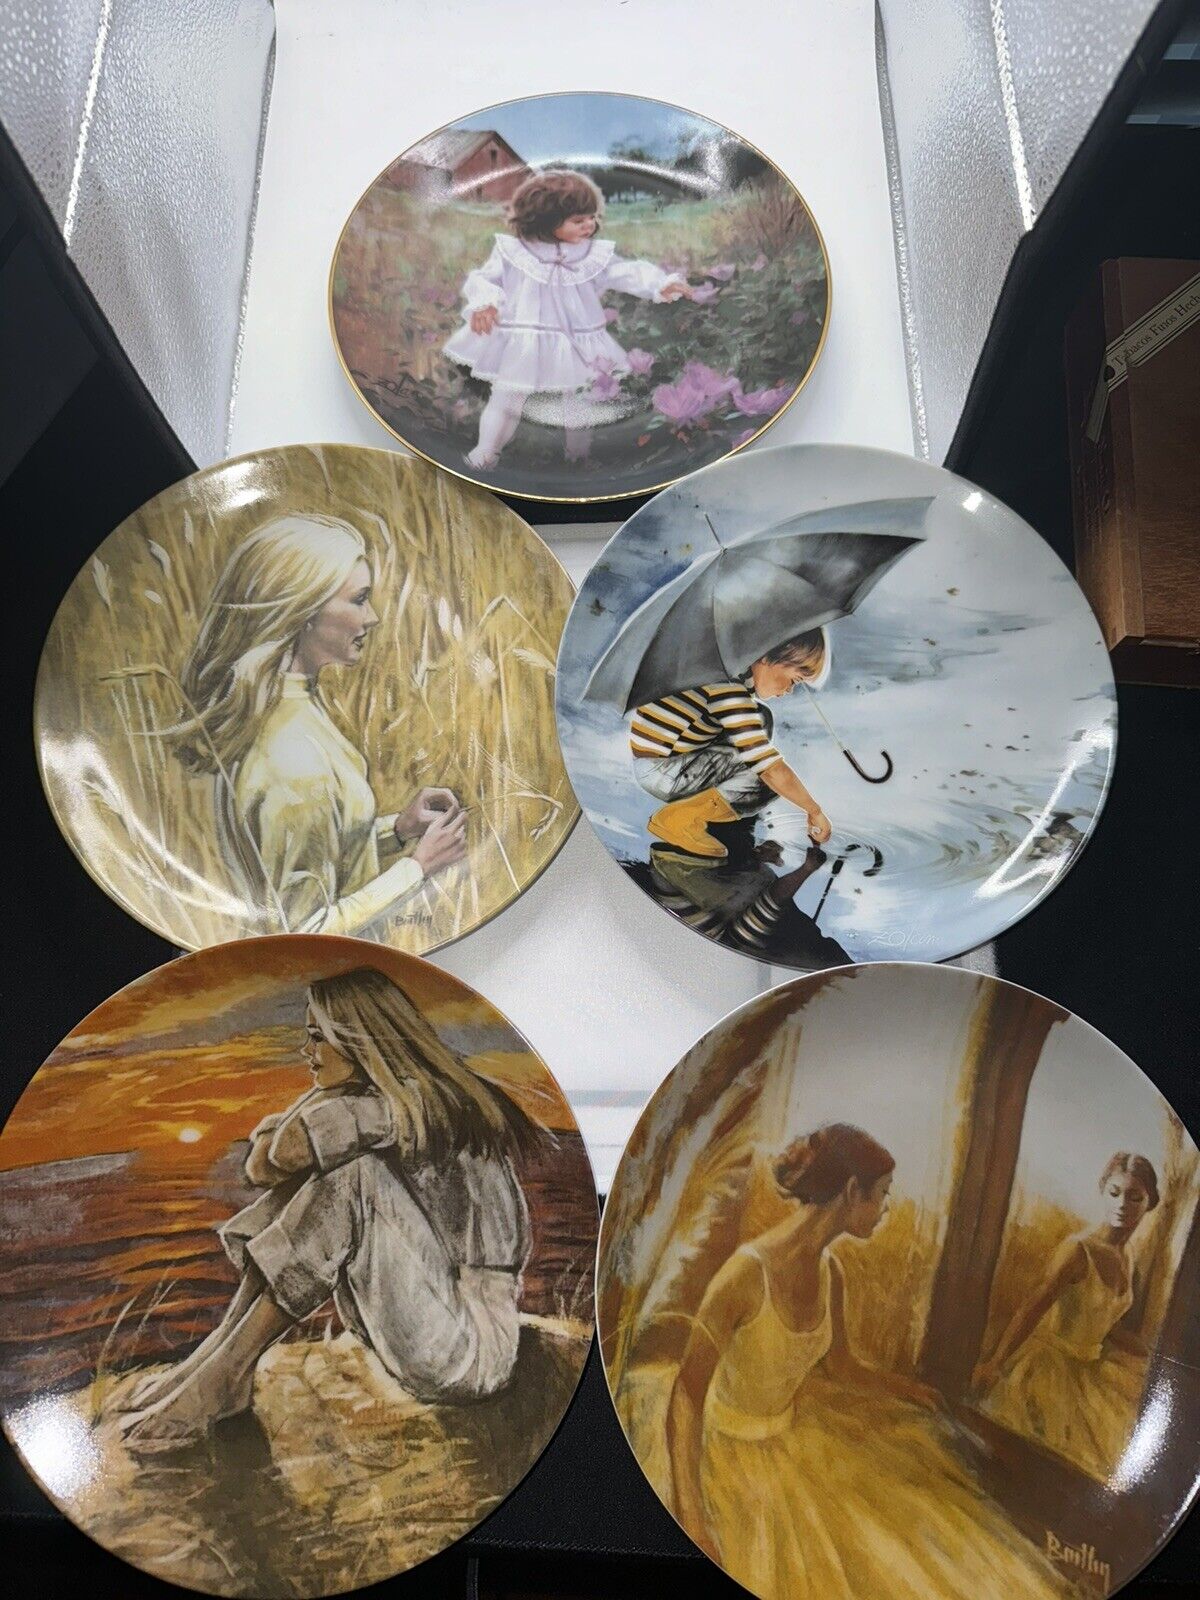 PEMBERTON & OAKES COLLECTOR PLATES 1980s - LOT OF 5 MIXED ARTISTS